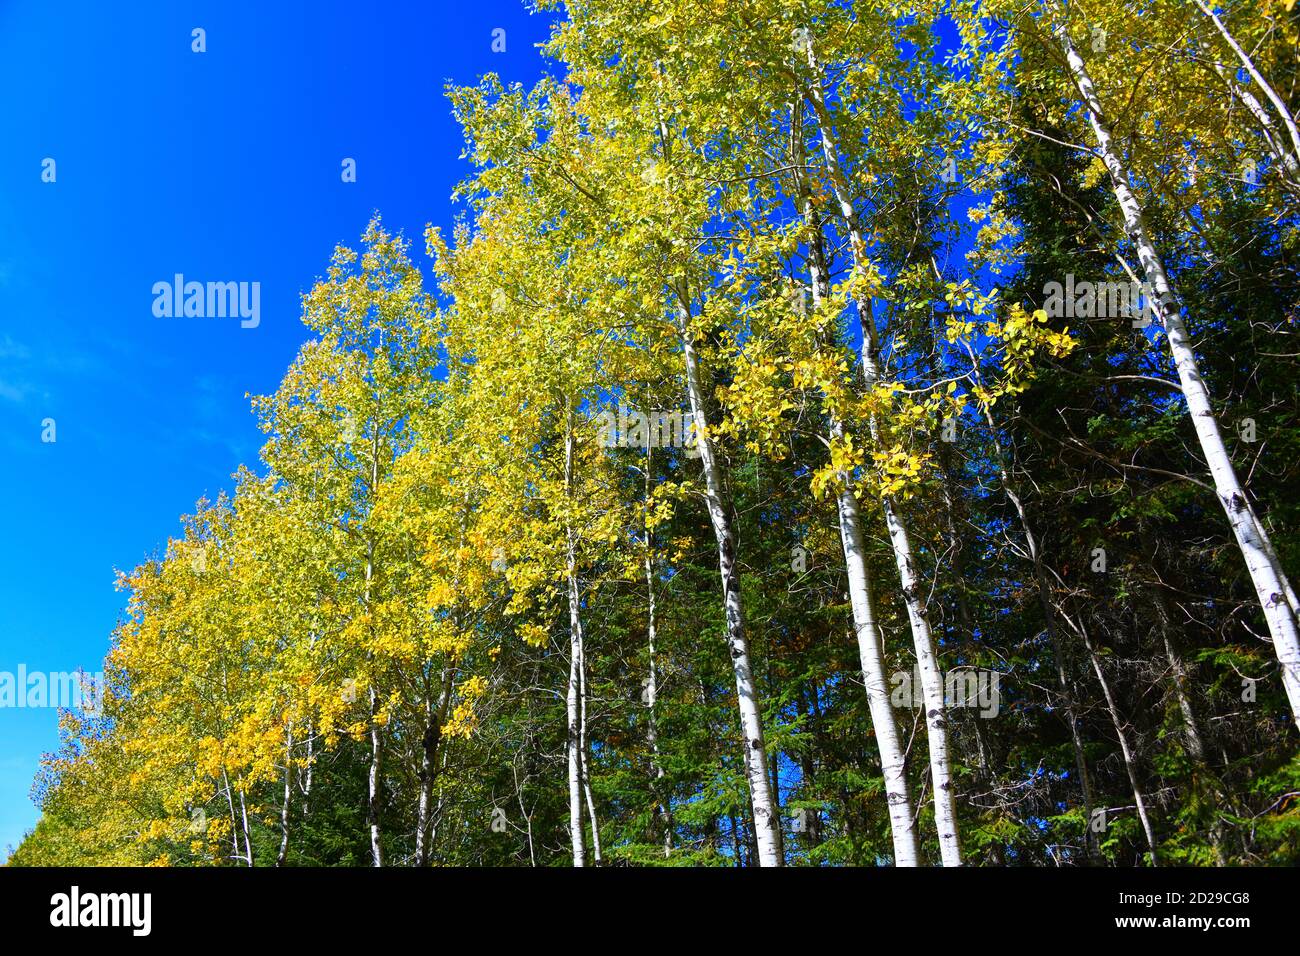 White barked trees with golden leaves and evergreens; under a bright blue sky in Northern Ontario, Canada. Stock Photo